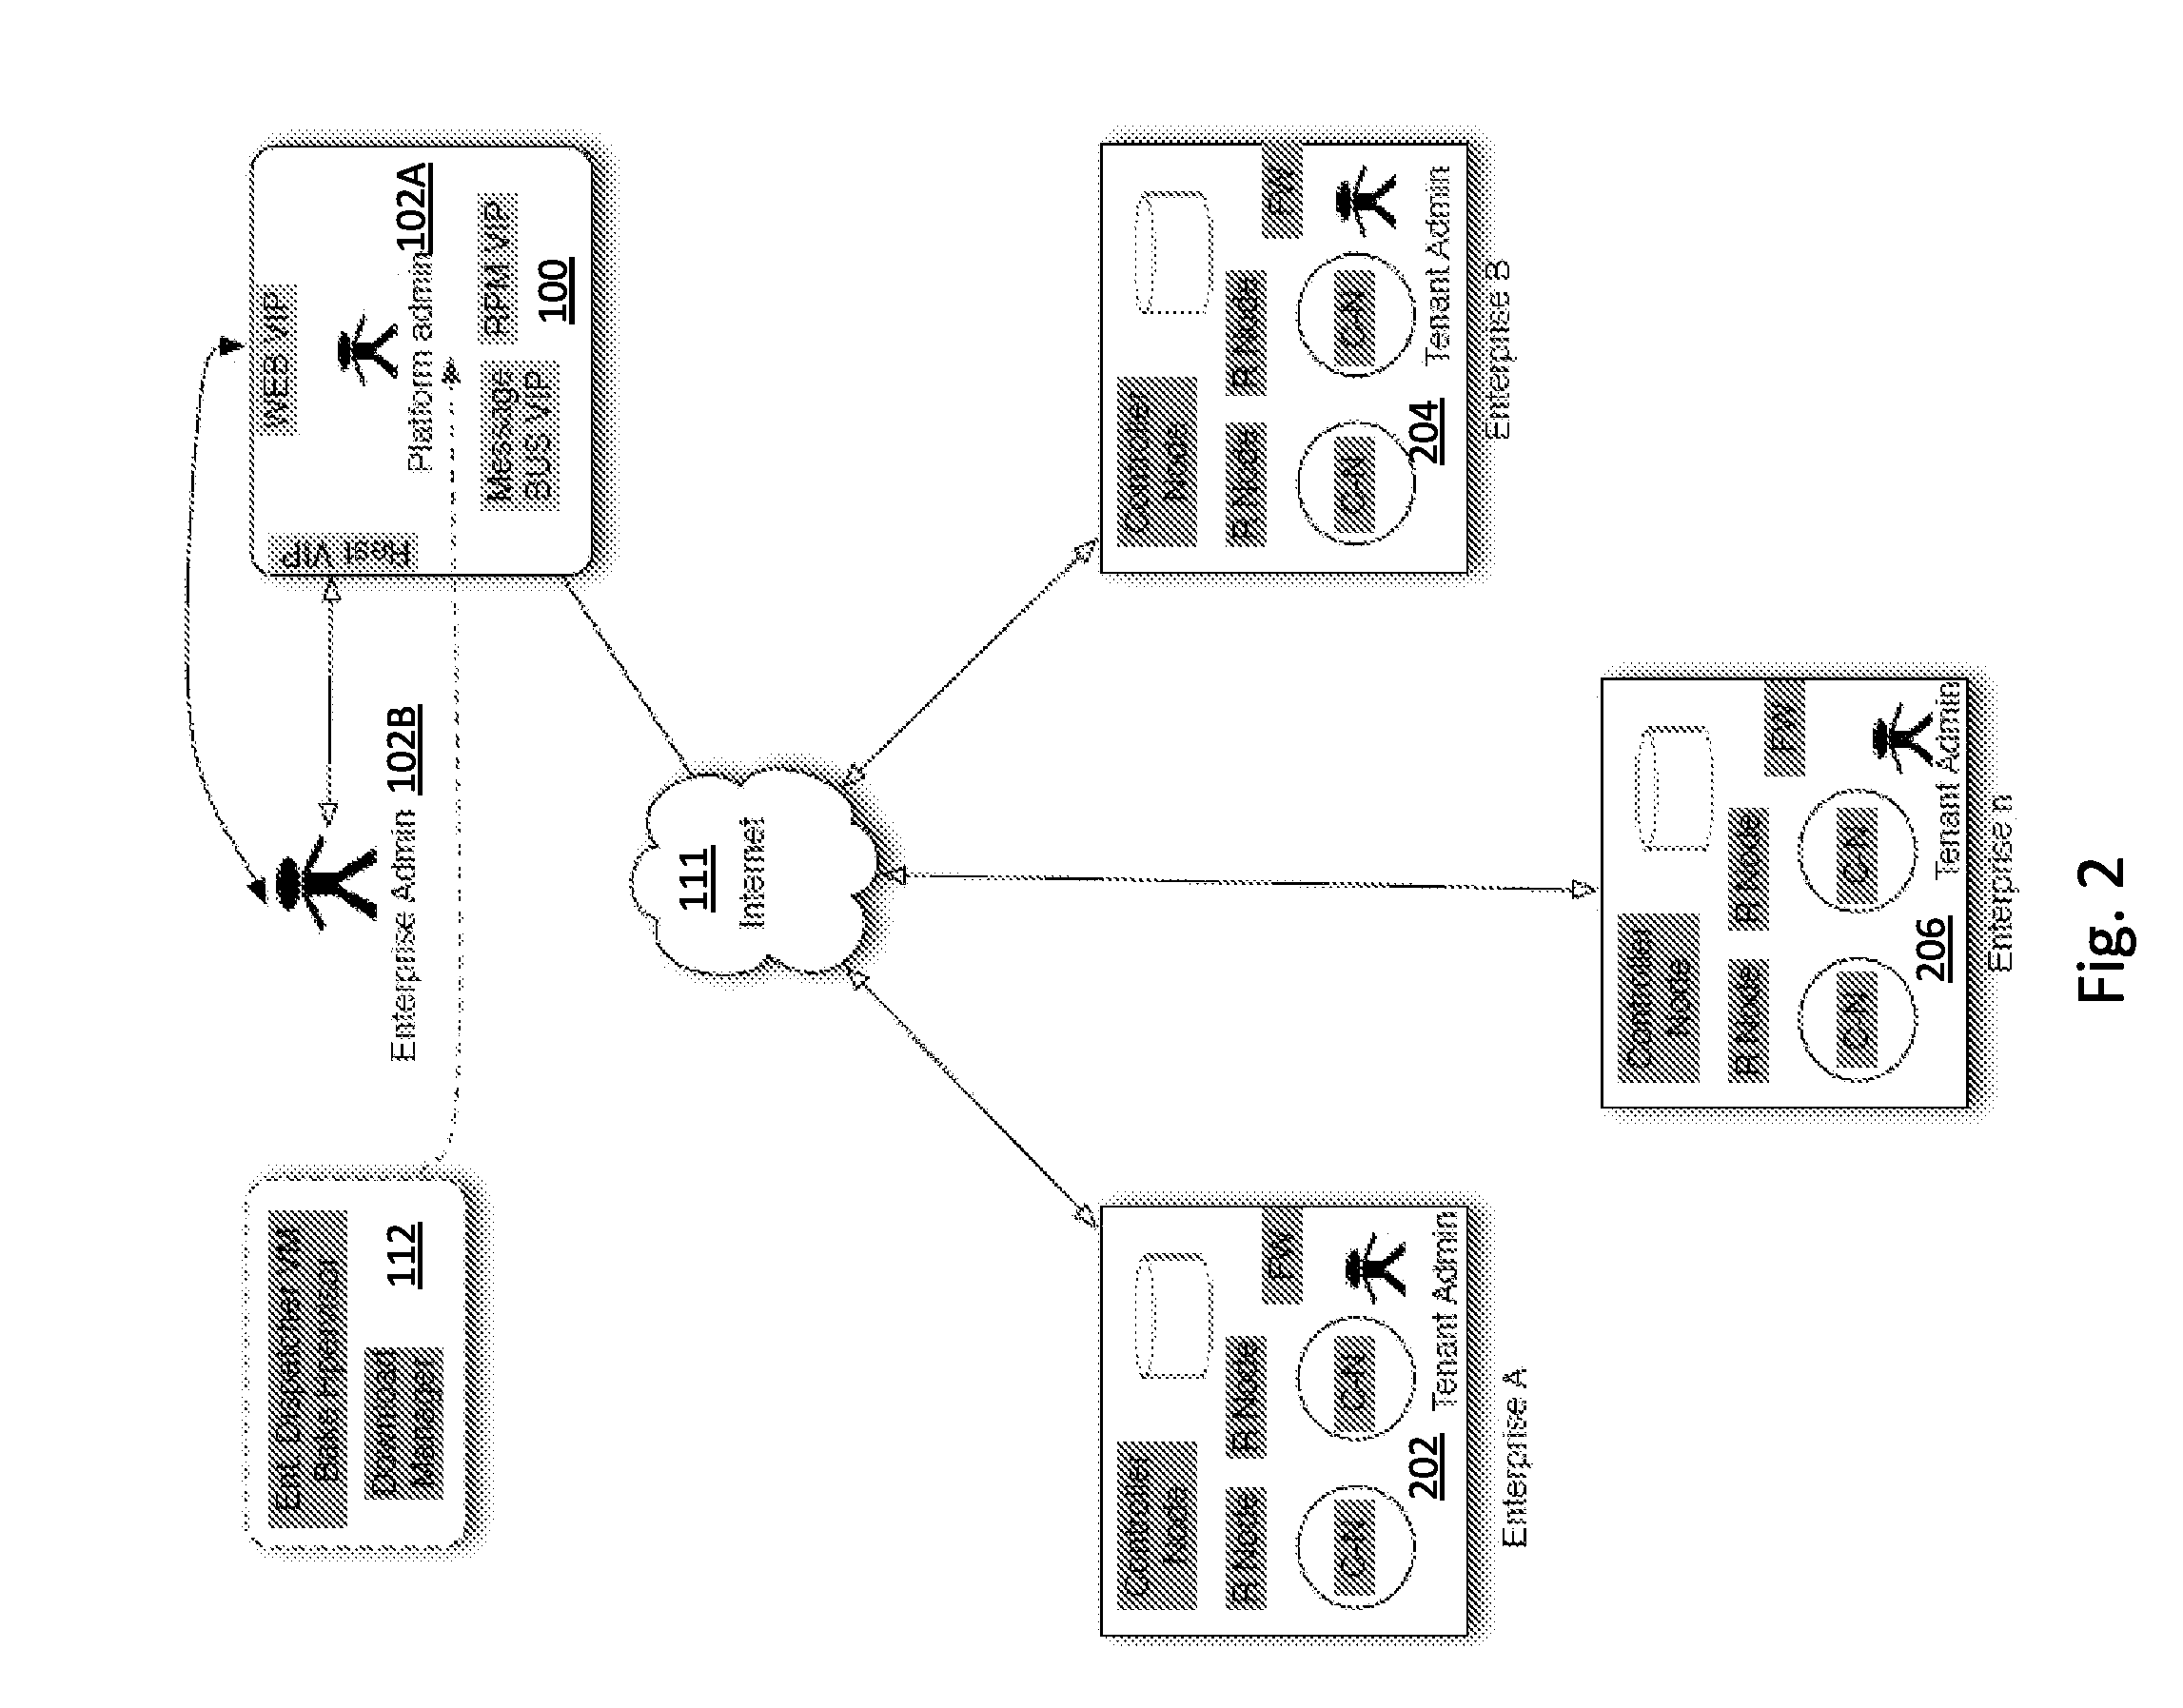 Method for deterministic service offering for enterprise computing environment